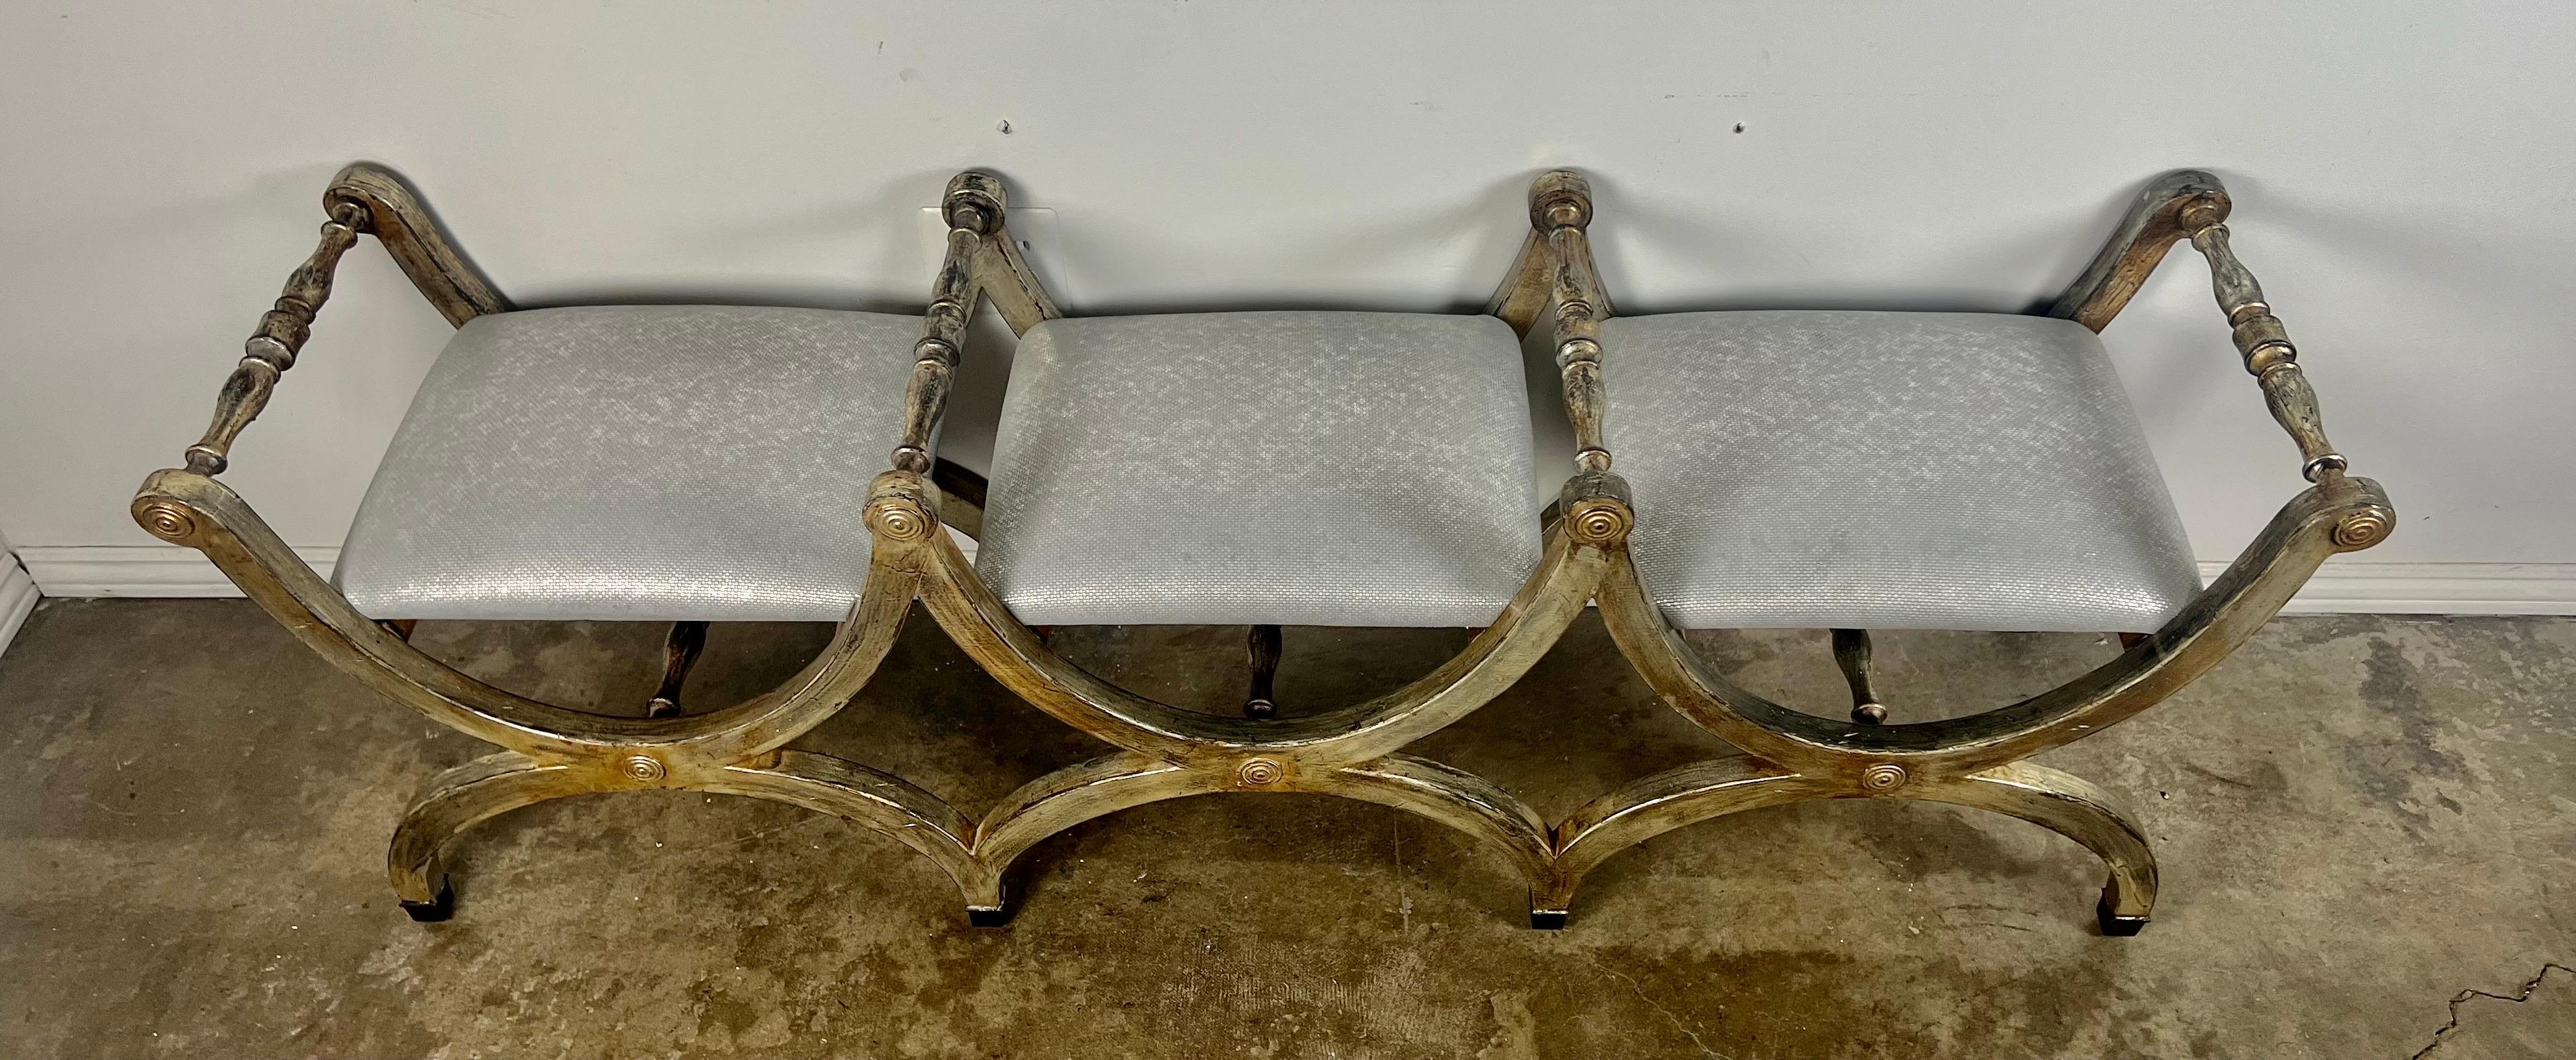 Italian Silvered 3-part Borghese Bench  C. 1930's For Sale